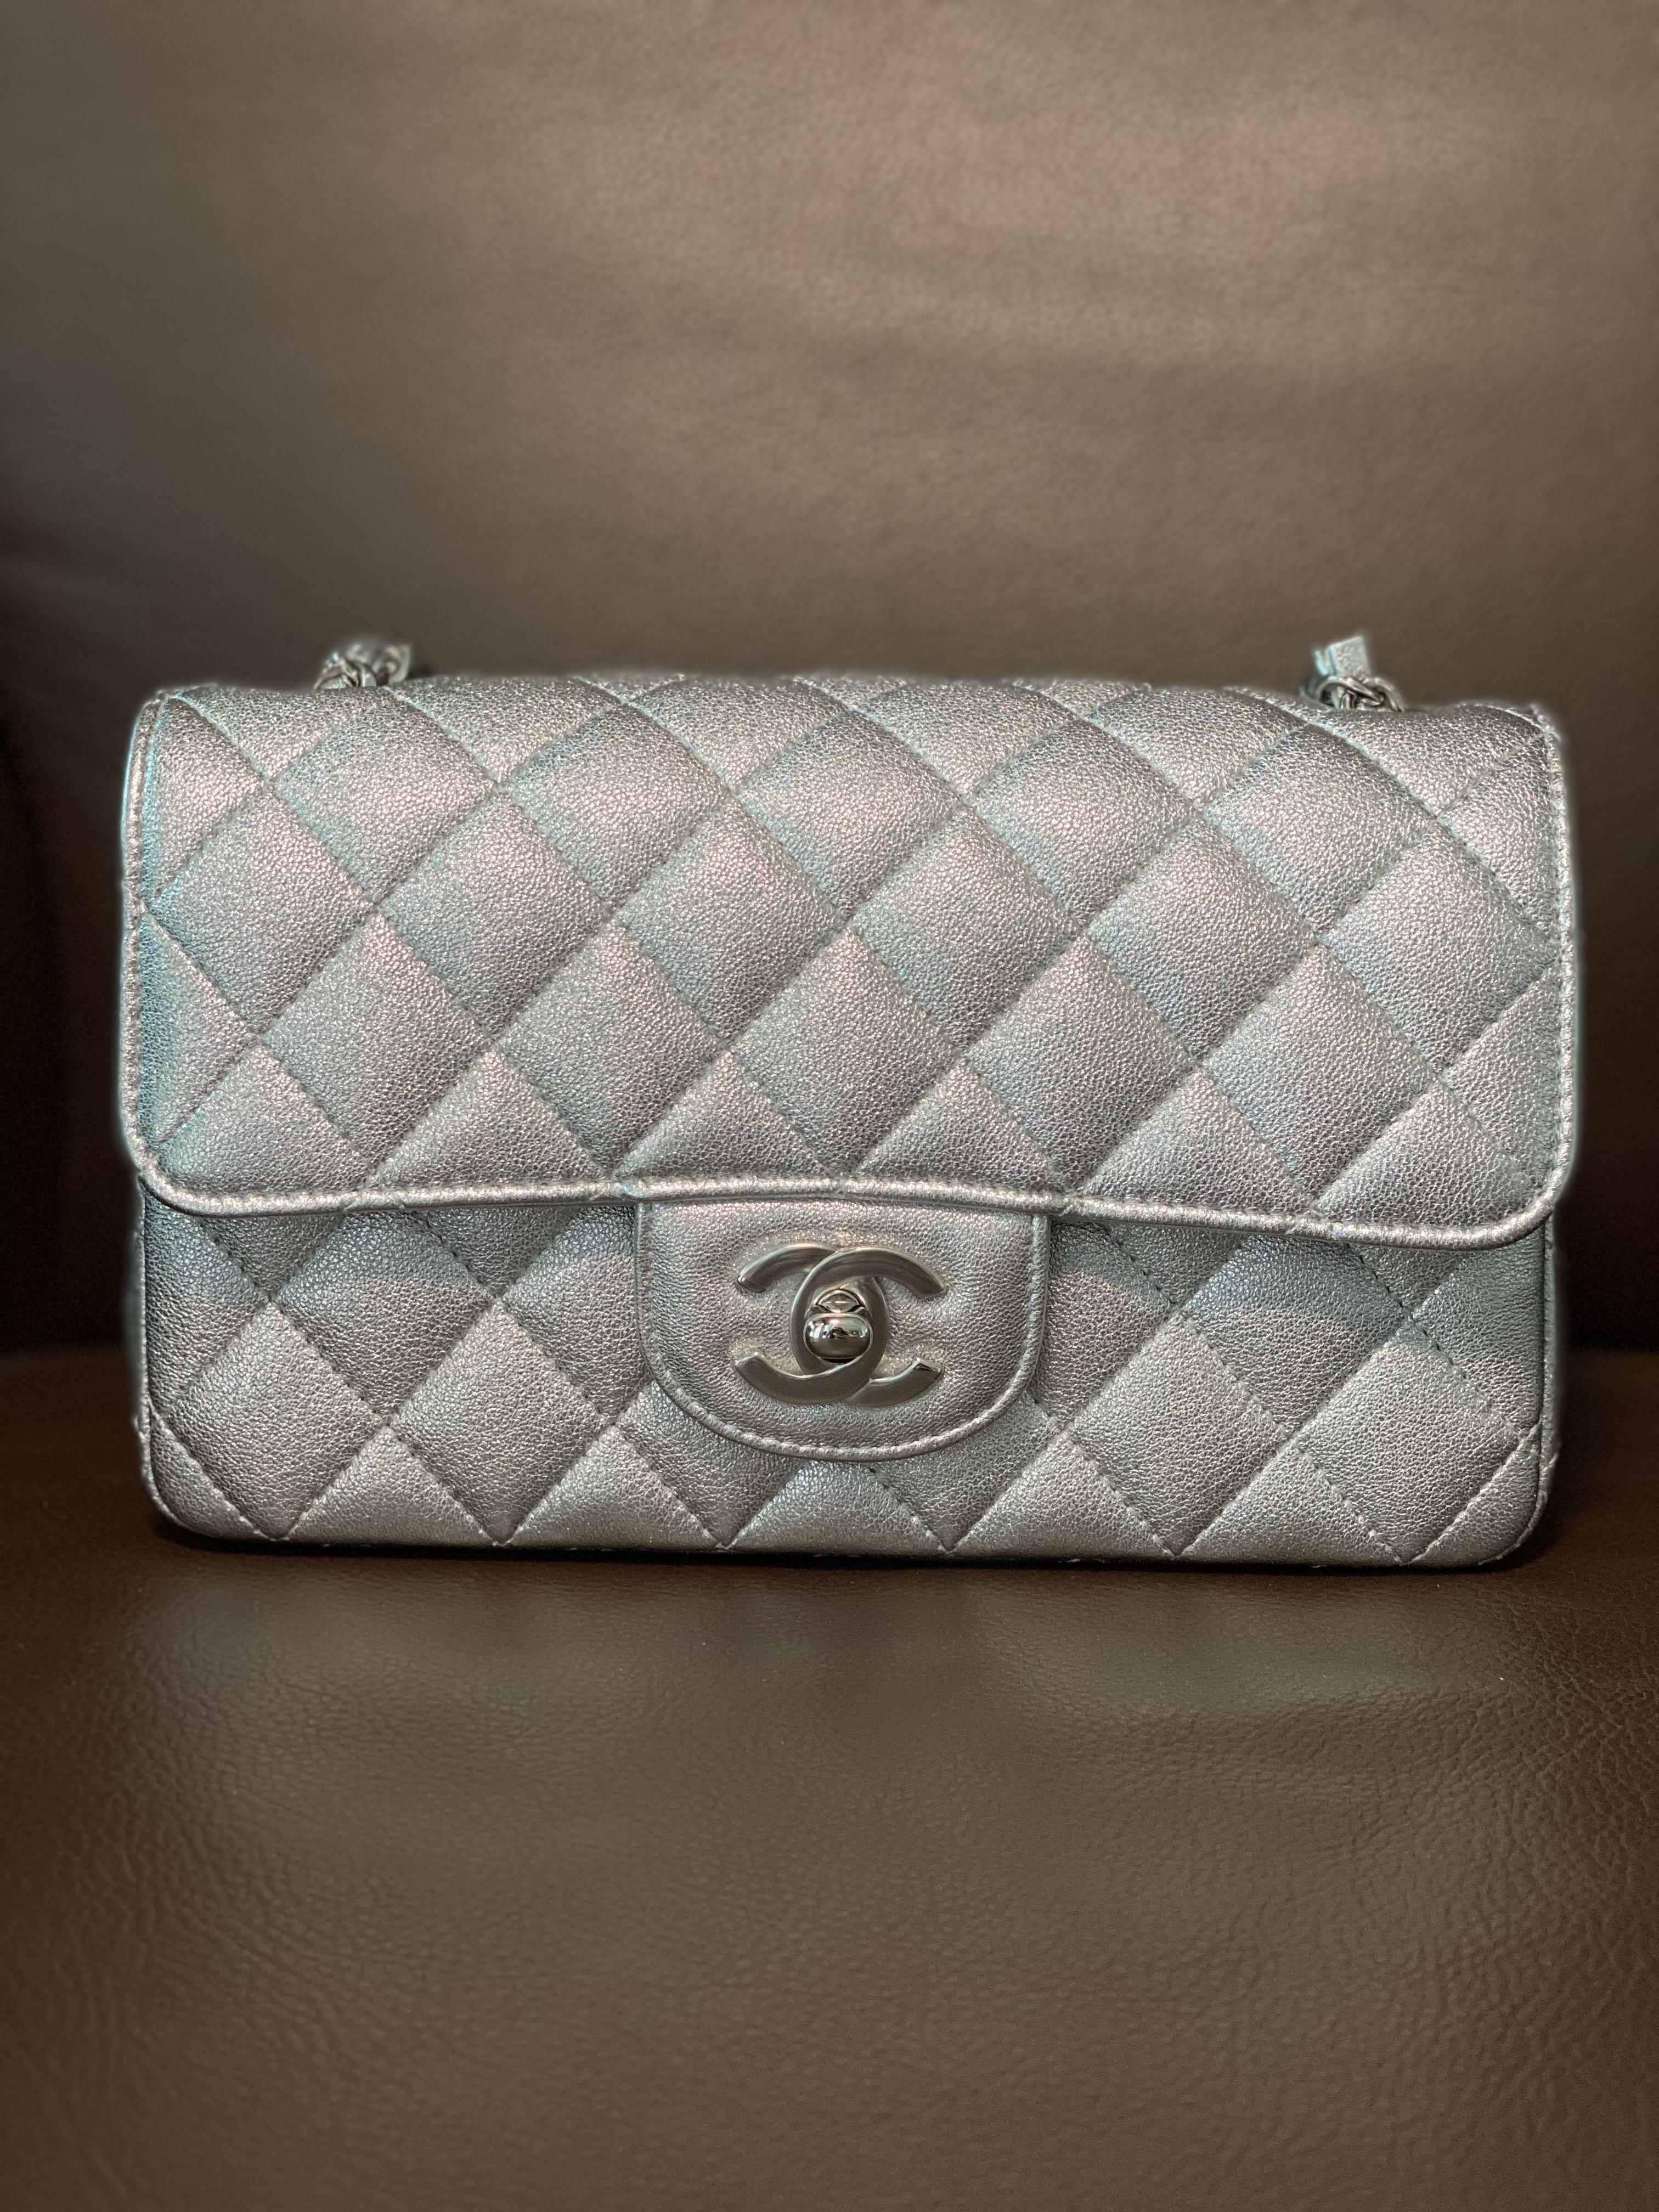 A Classic Chanel Bag Worth the Investment  Gulshan London